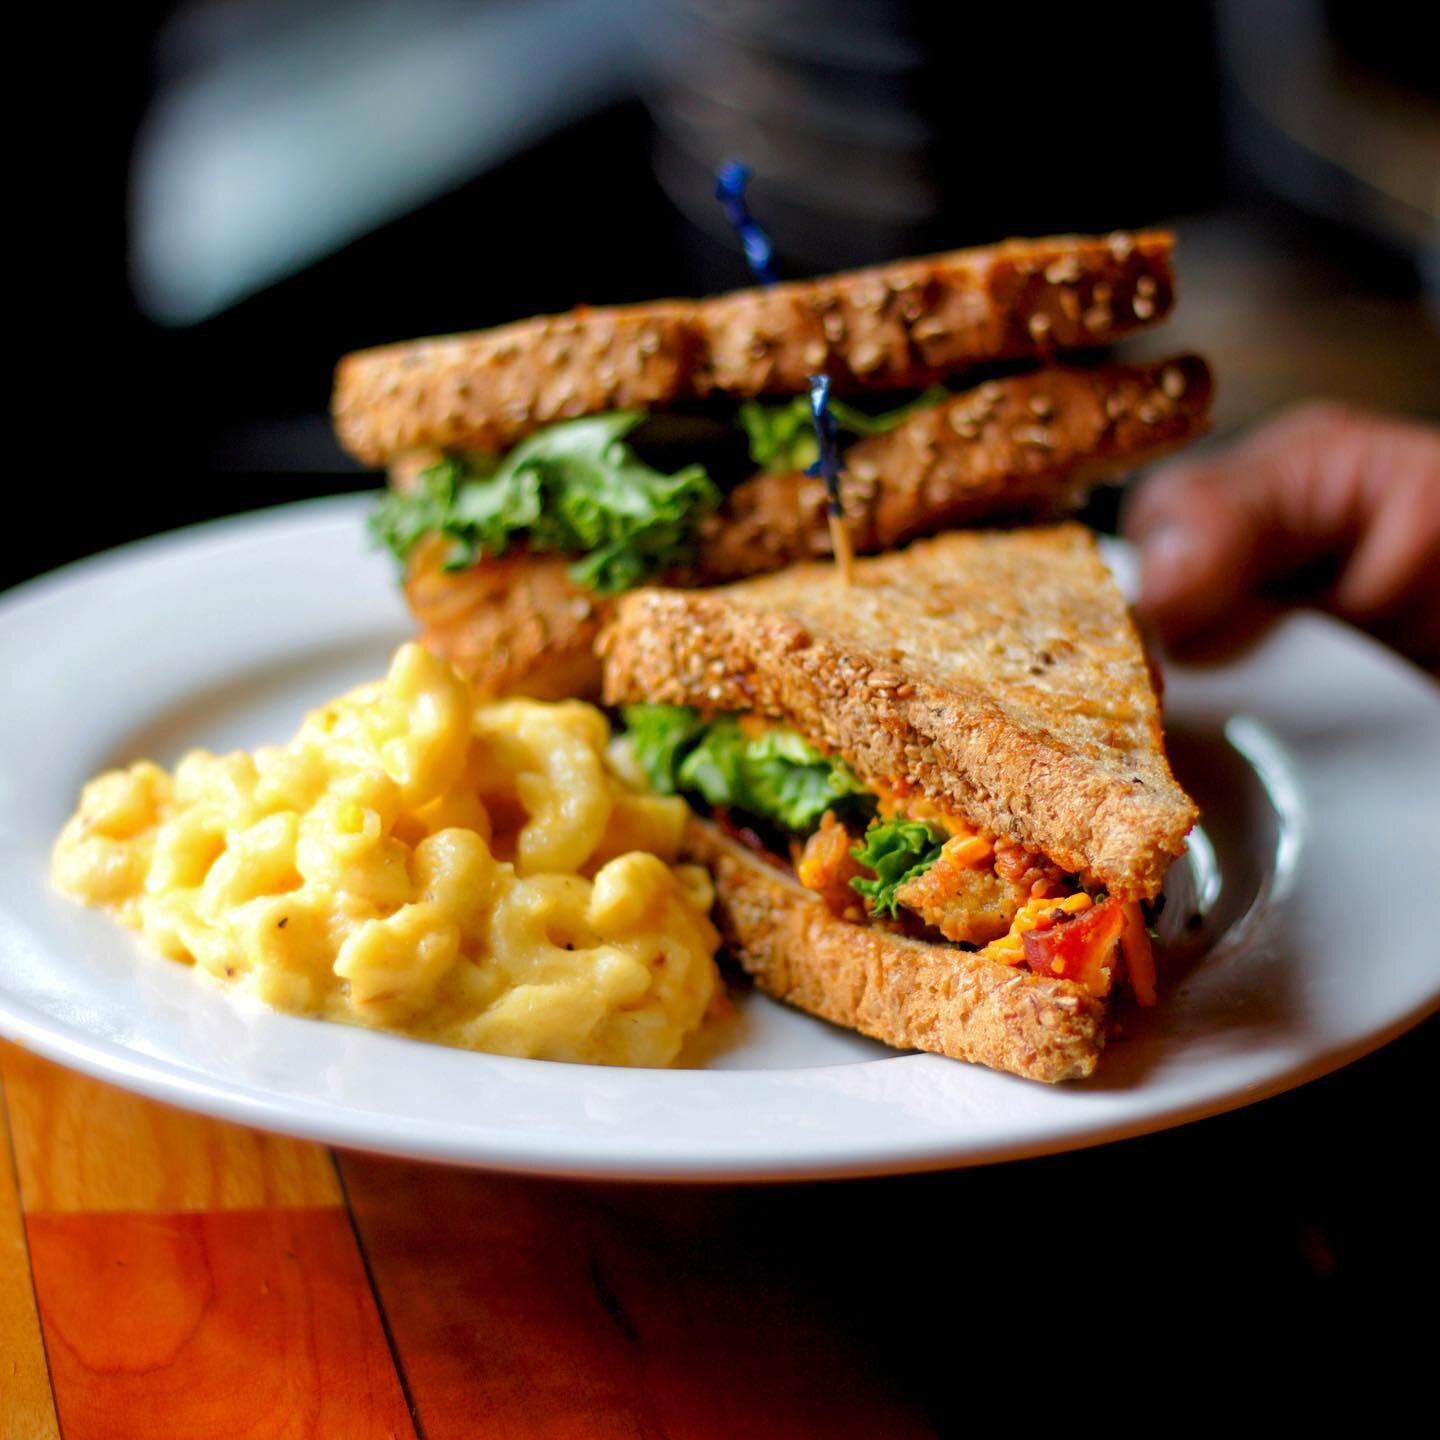 Bacon ✔️ Lettuce ✔️ Fried Green Tomato ✔️ Avocado ✔️
And, of course, Mac &amp; Cheese!
#ThePlaceAthens
#AthensGa